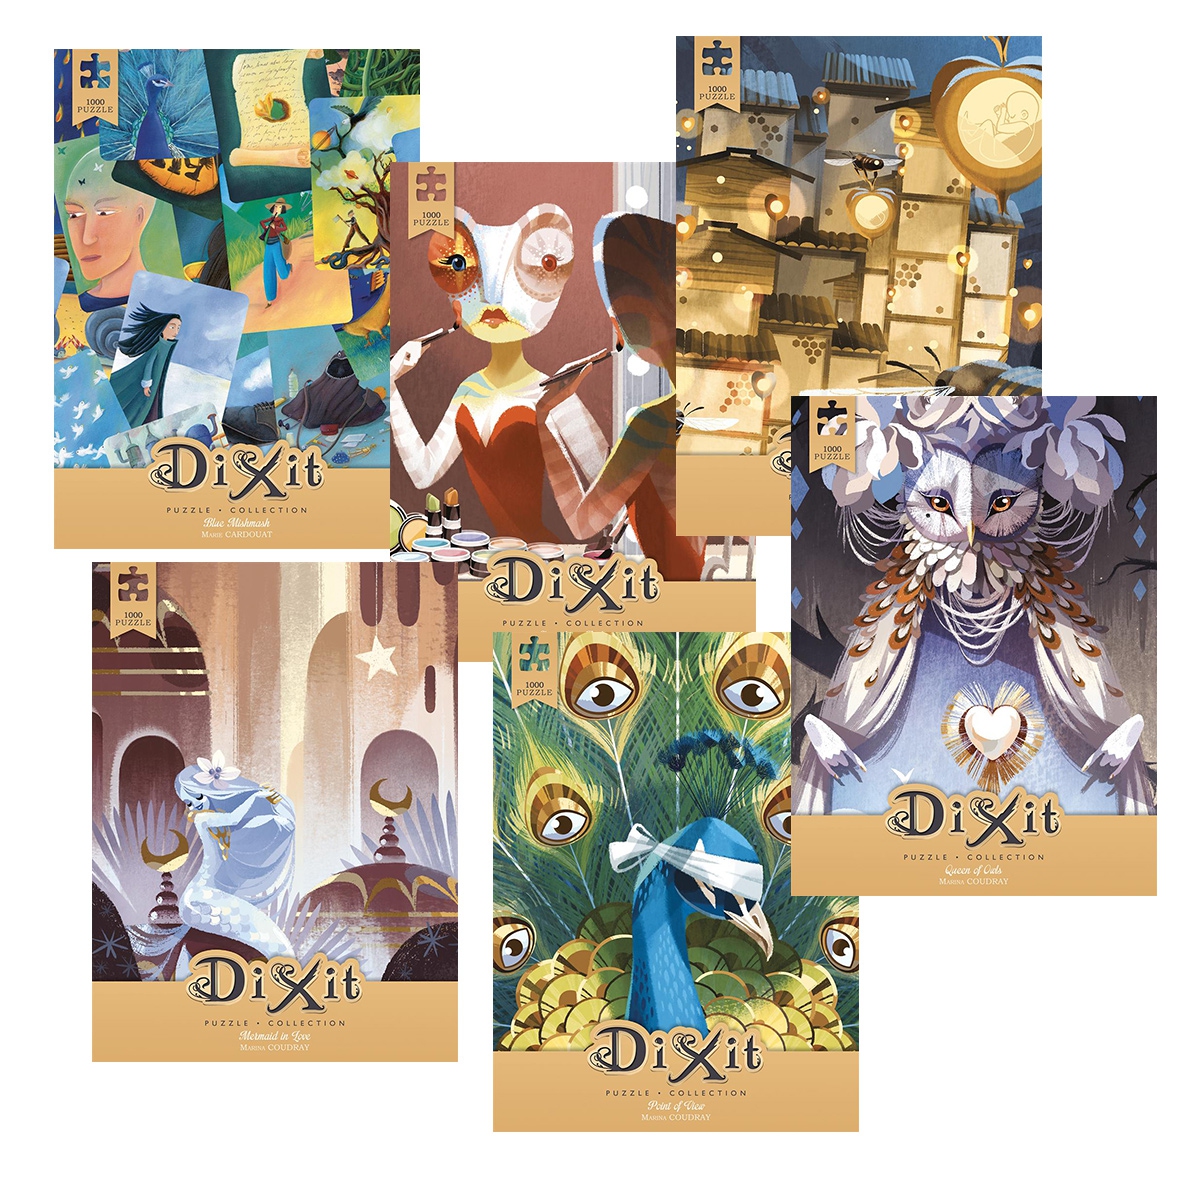 Dixit Puzzle Mermaid in love 1000 pièces - Libellud